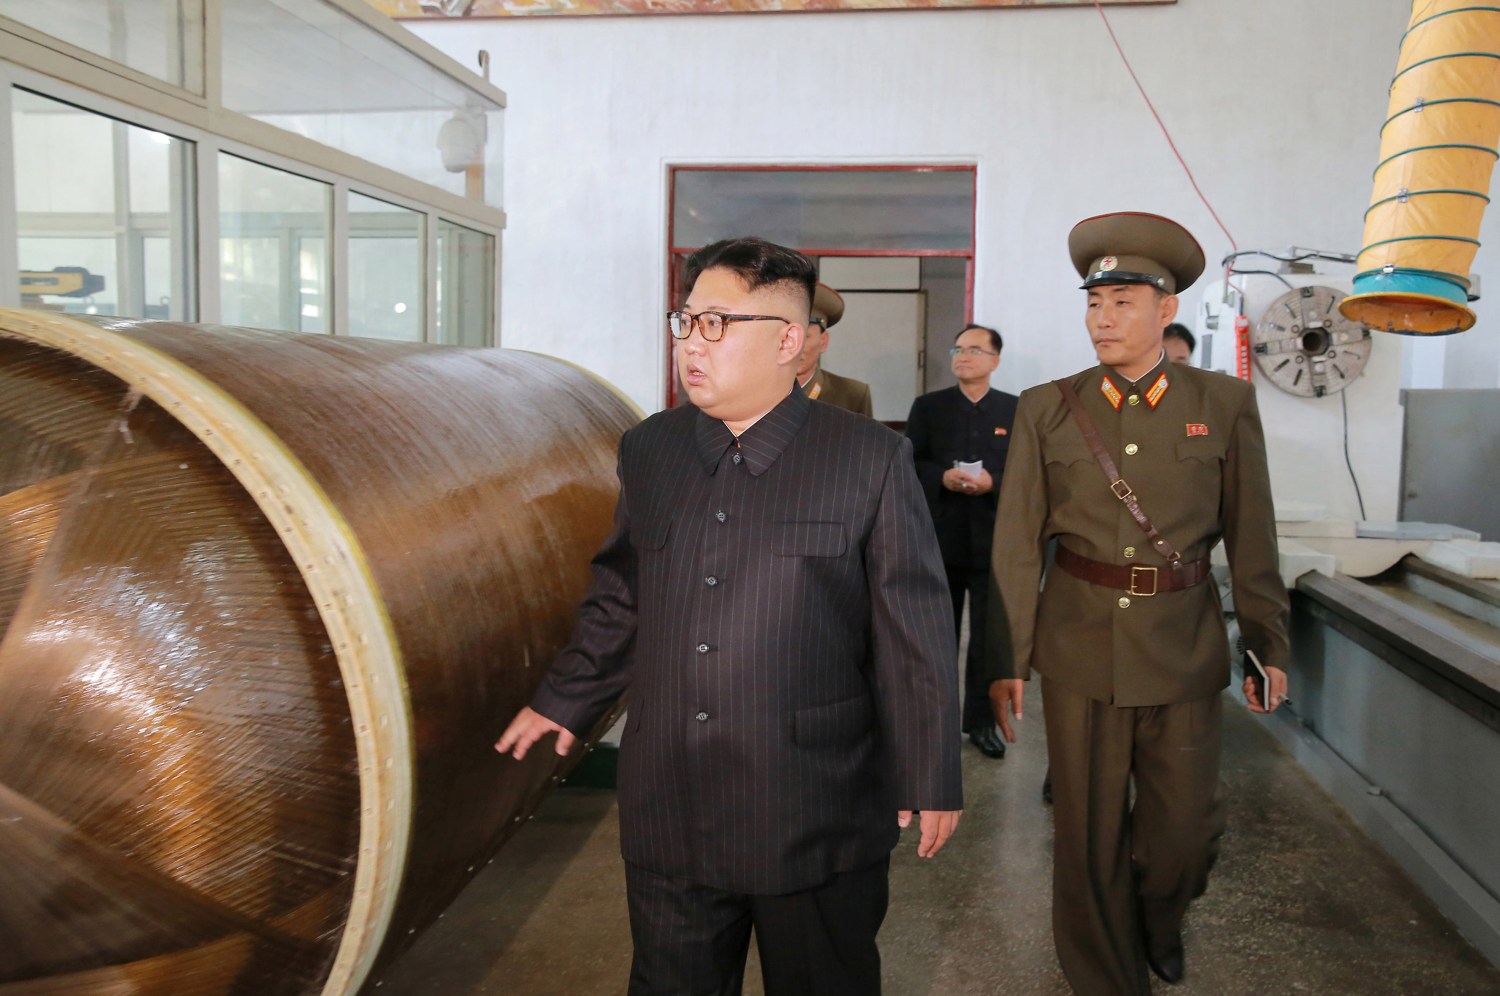 North Korean leader Kim Jong-Un looks on during a visit to the Chemical Material Institute of the Academy of Defense Science in this undated photo released by North Korea's Korean Central News Agency (KCNA) in Pyongyang on August 23, 2017. KCNA/via REUTERS ATTENTION EDITORS - THIS PICTURE WAS PROVIDED BY A THIRD PARTY. REUTERS IS UNABLE TO INDEPENDENTLY VERIFY THE AUTHENTICITY, CONTENT, LOCATION OR DATE OF THIS IMAGE. FOR EDITORIAL USE ONLY. NOT FOR SALE FOR MARKETING OR ADVERTISING CAMPAIGNS. NO THIRD PARTY SALES. NOT FOR USE BY REUTERS THIRD PARTY DISTRIBUTORS. SOUTH KOREA OUT. NO COMMERCIAL OR EDITORIAL SALES IN SOUTH KOREA. THIS PICTURE IS DISTRIBUTED EXACTLY AS RECEIVED BY REUTERS, AS A SERVICE TO CLIENTS. - RTS1D447